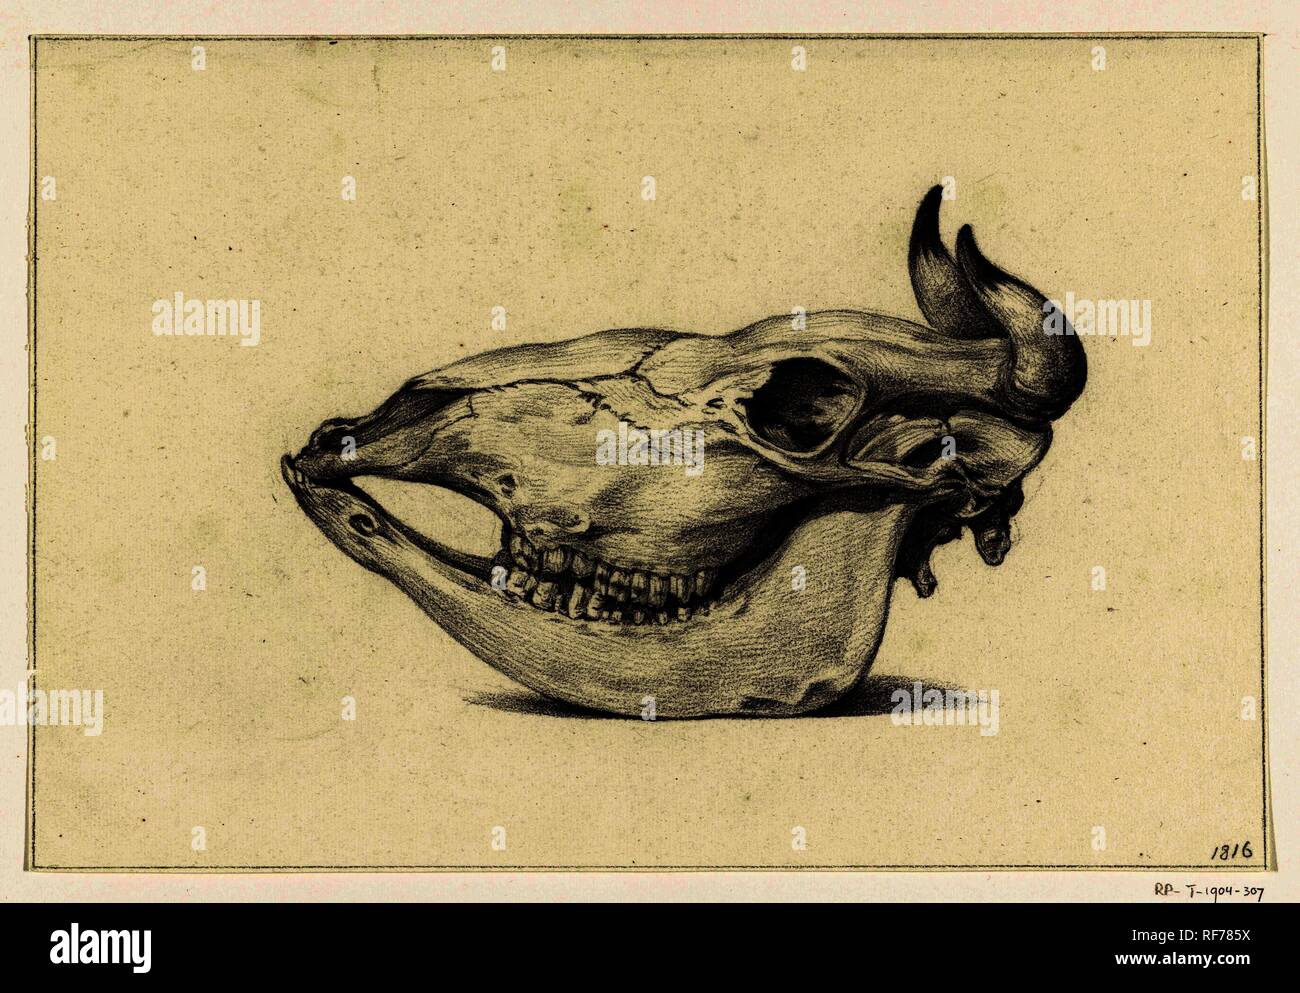 Skull of a cow, seen from the side. Draughtsman: Jean Bernard. Dating: 1816. Measurements: h 190 mm × w 280 mm. Museum: Rijksmuseum, Amsterdam. Stock Photo